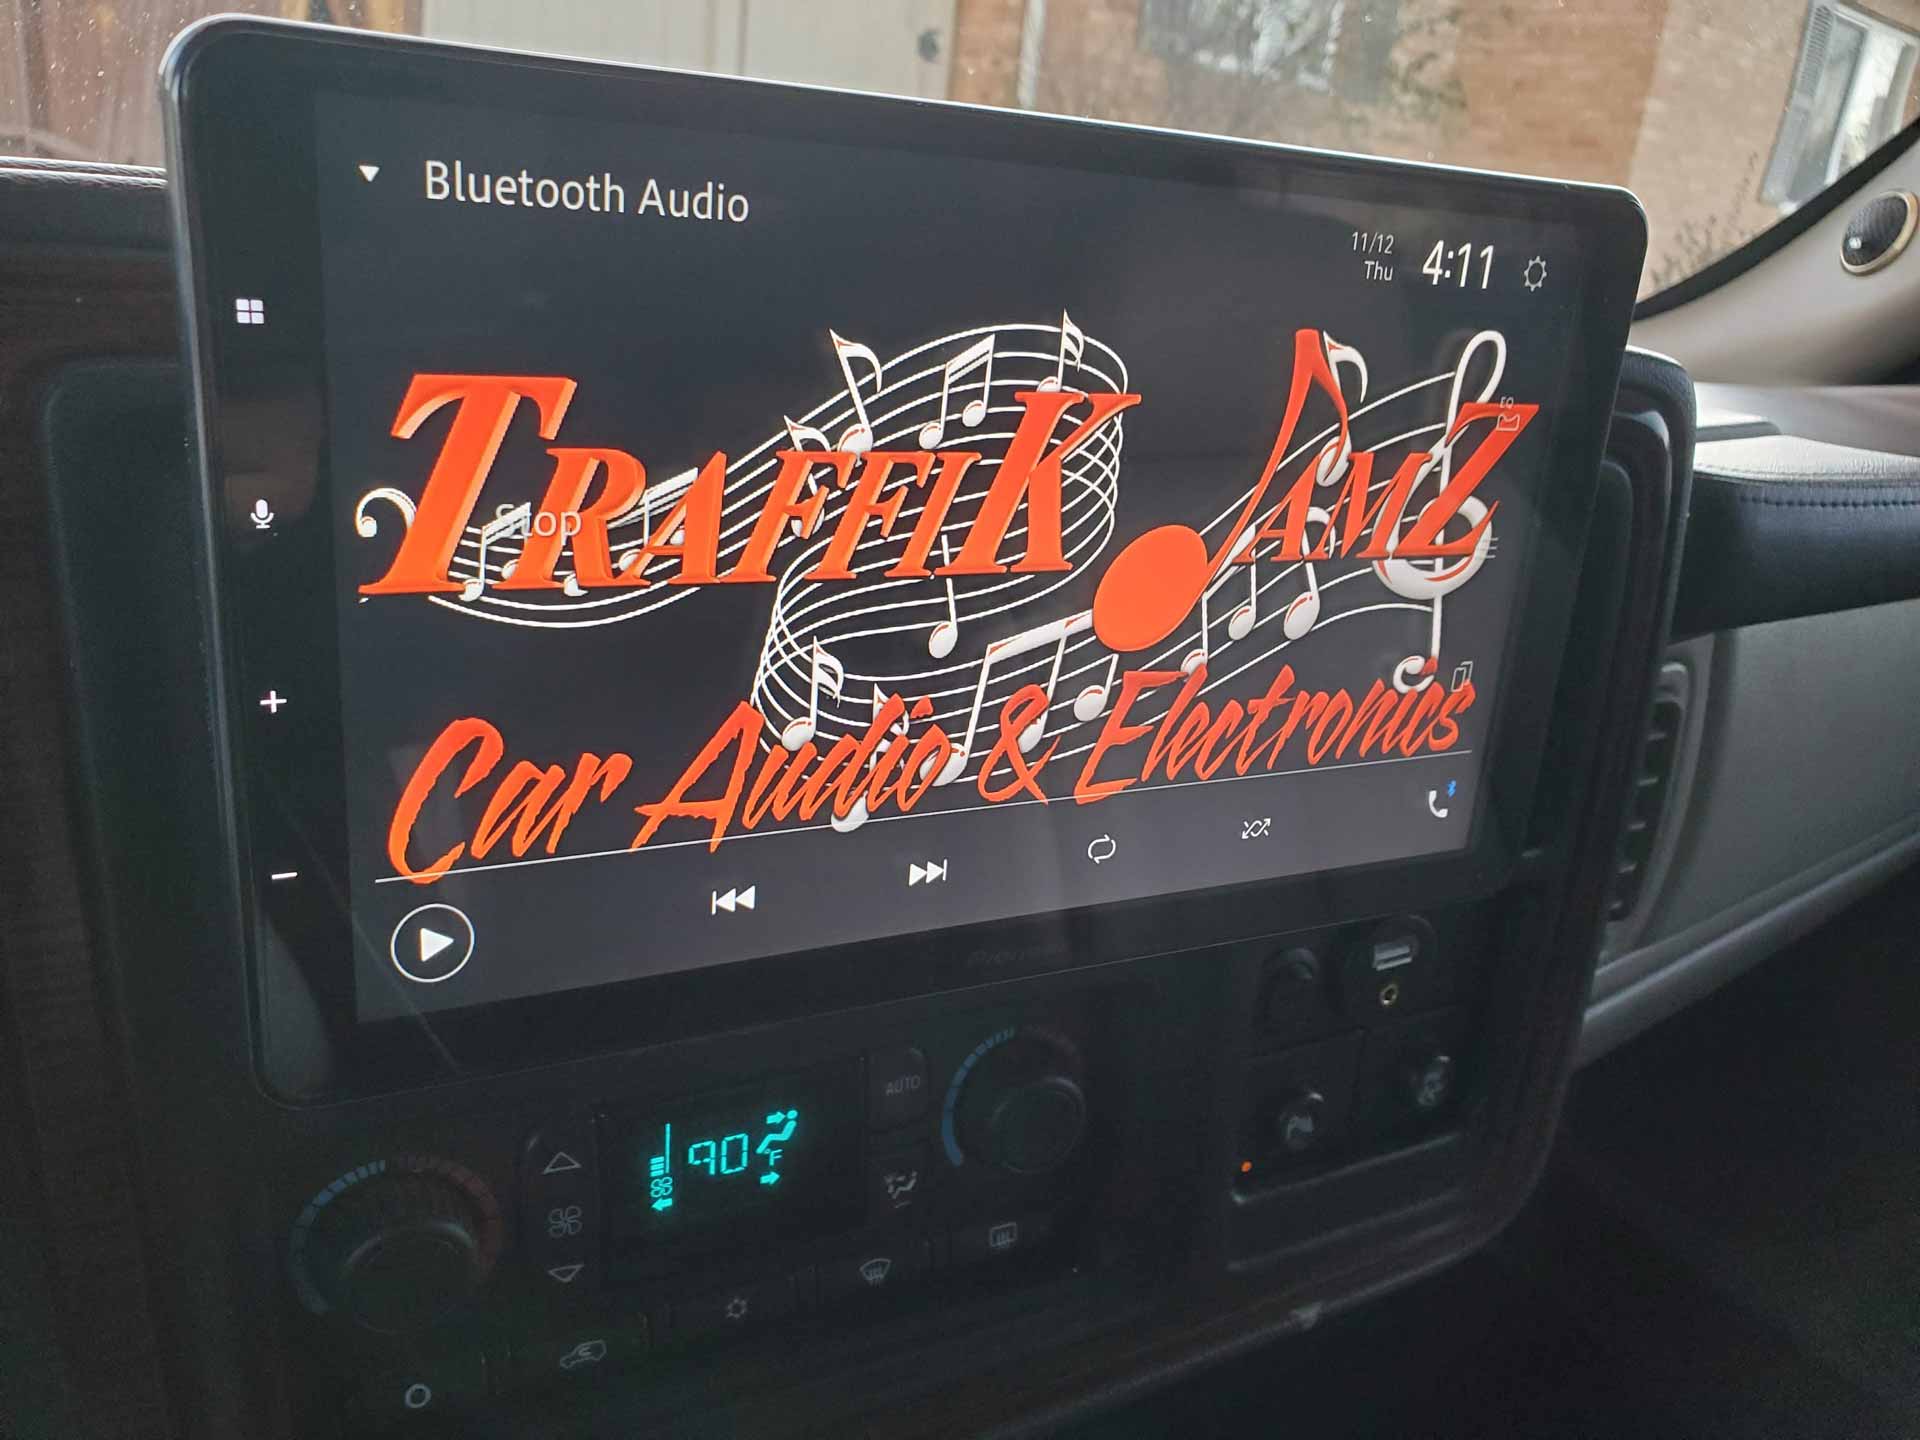 In-dash touch screen installed in car, displaying the Traffic Jamz Car Audio logo